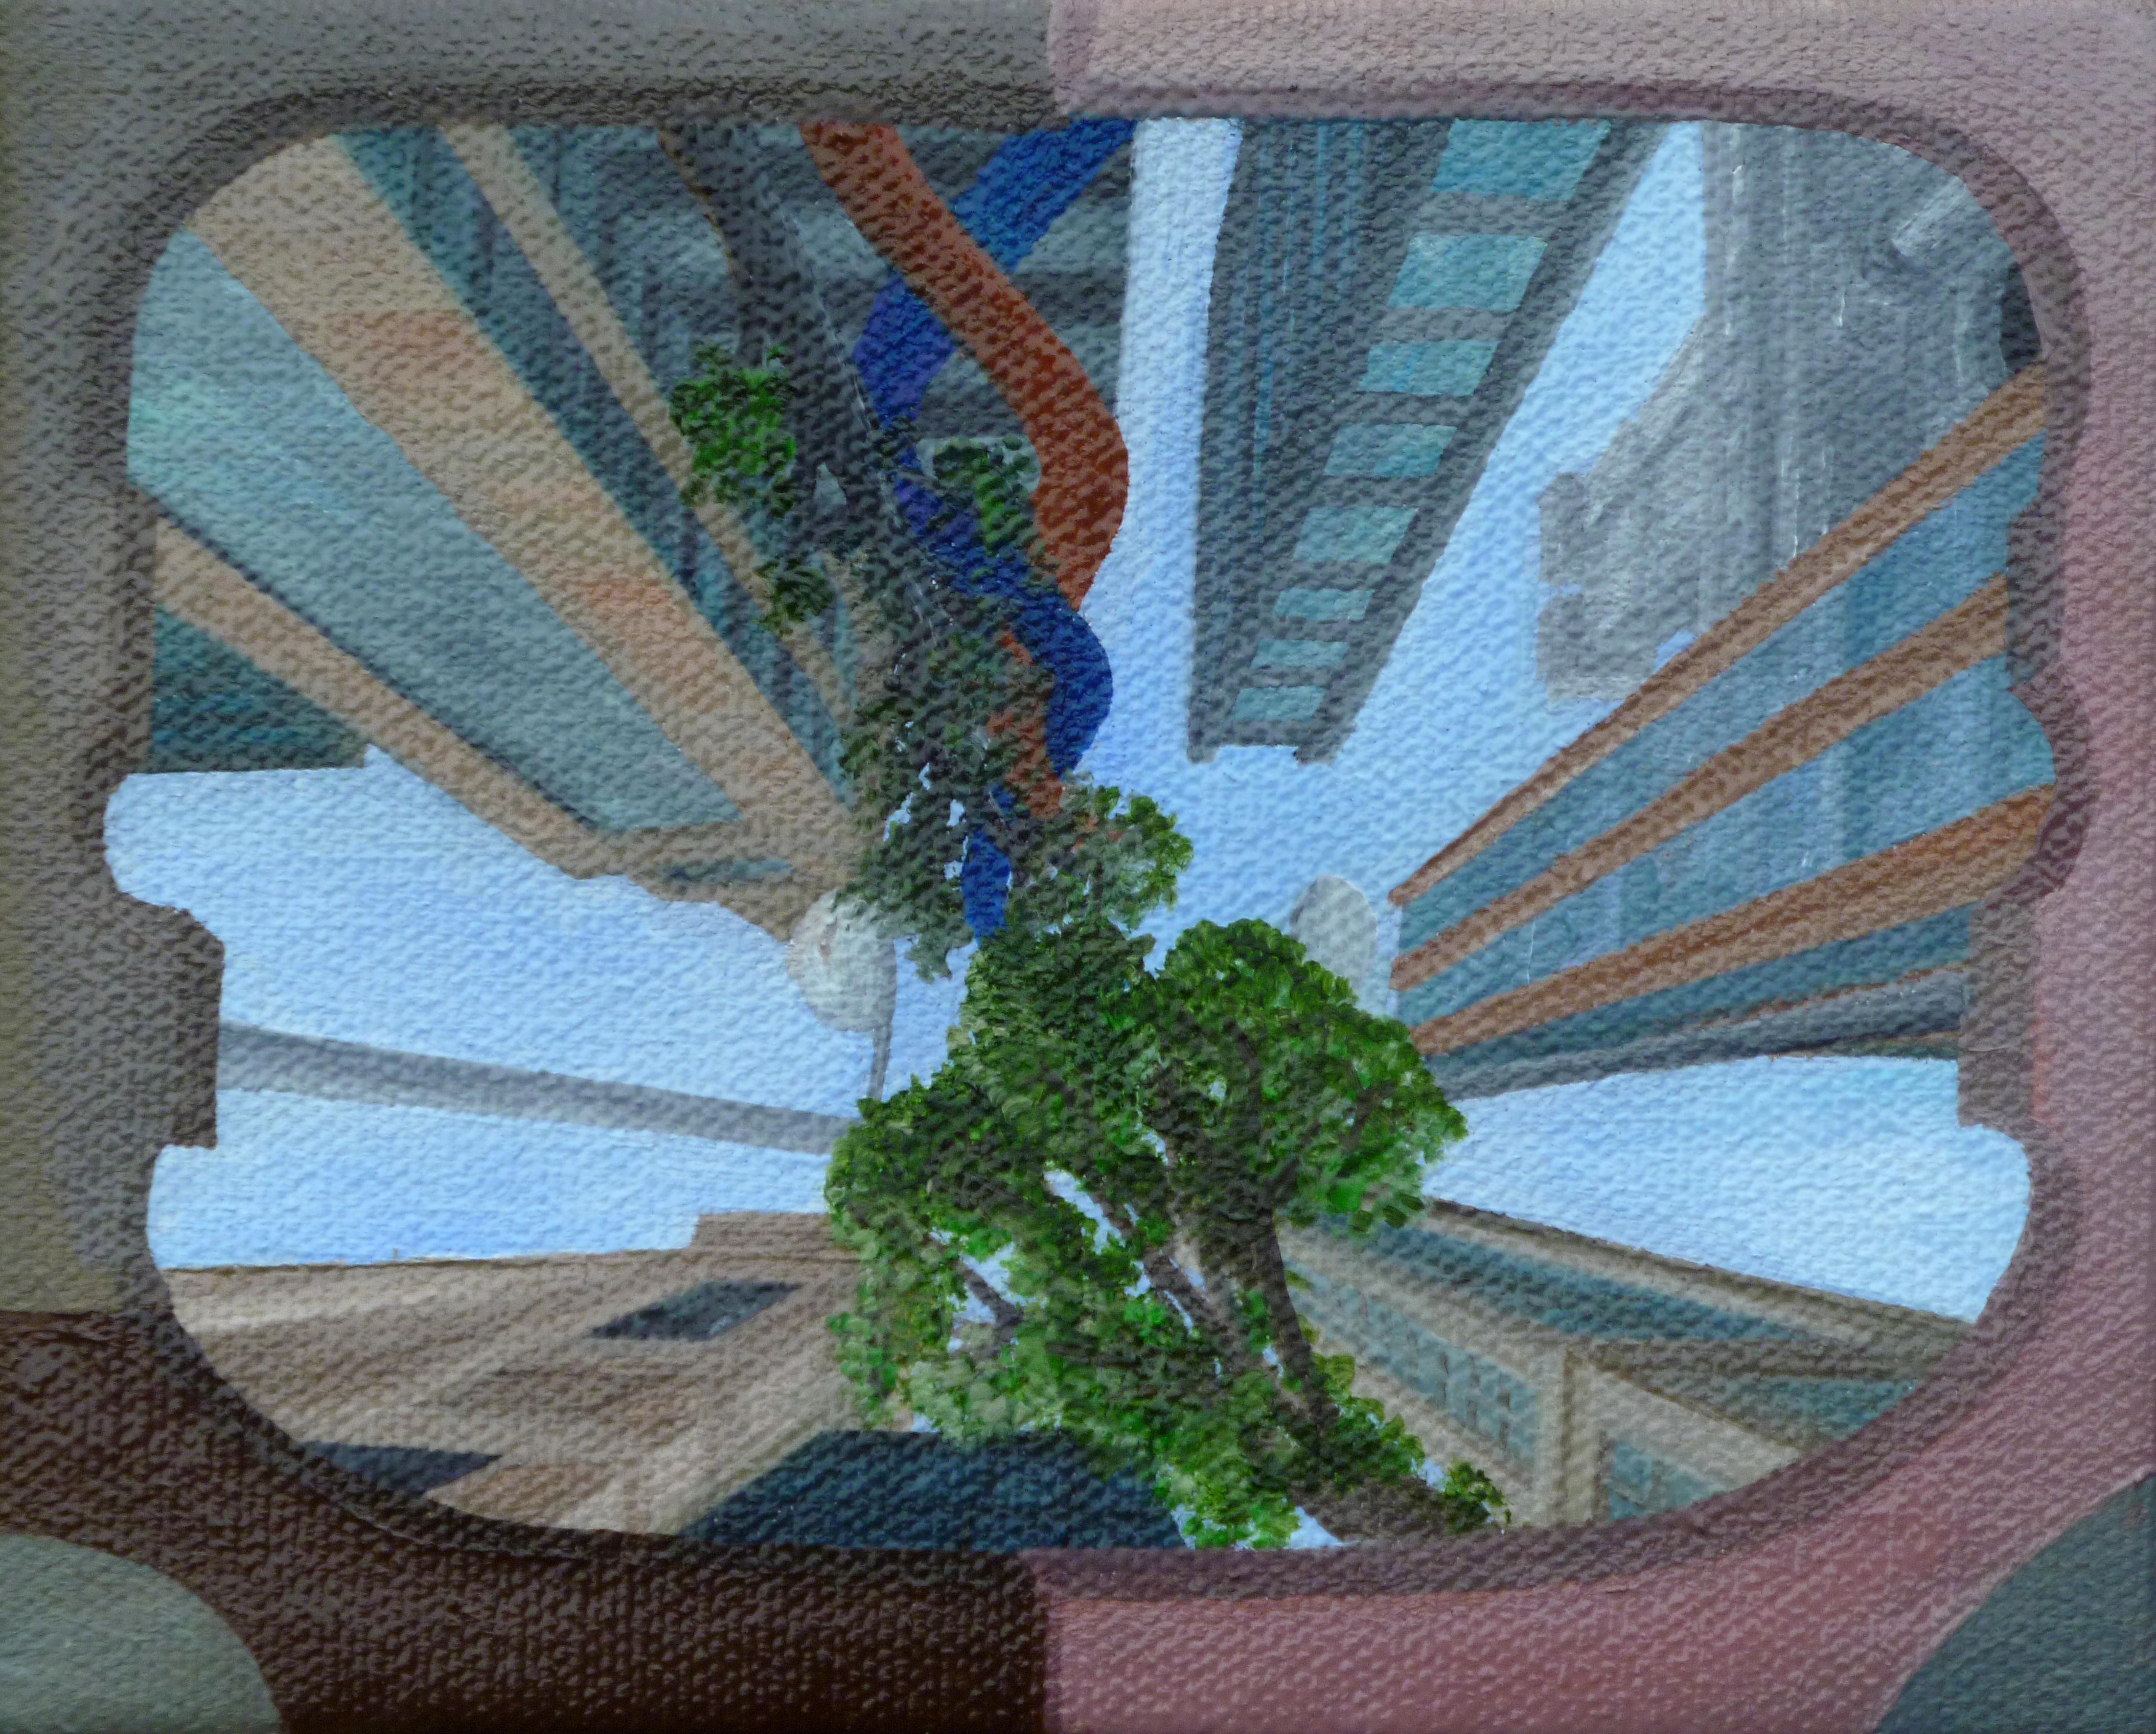 Samuel Leopold Abstract Painting - Micro Sculpture Sky